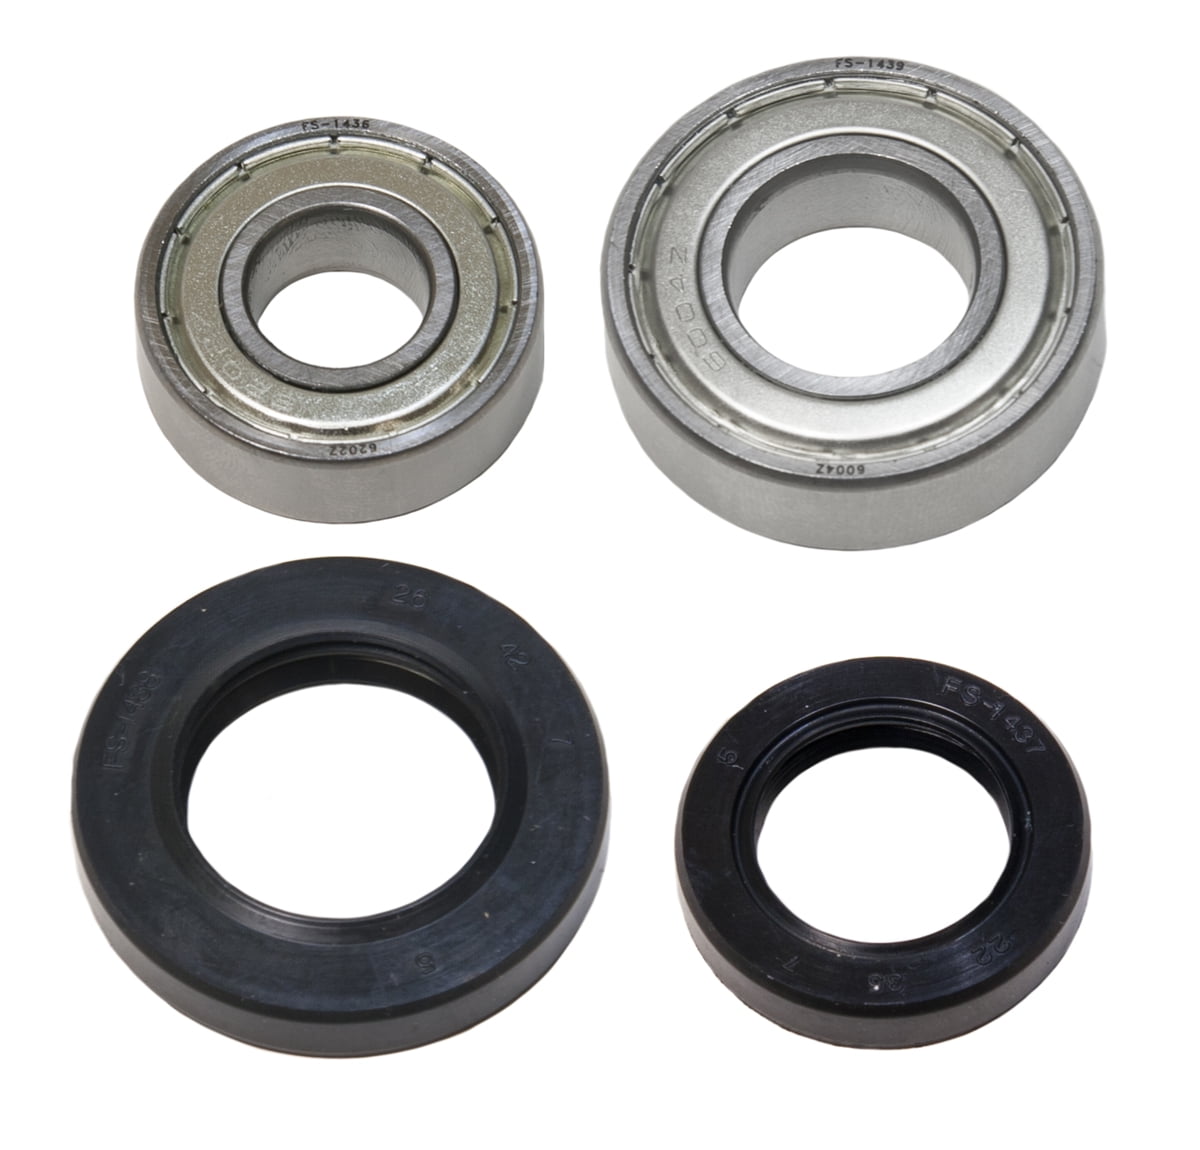 Caltric Front Wheel Ball Bearings & Seals Kit Compatible with Yamaha Blaster 200 Yfs200 Yfs-200 2003 04 05 2006 